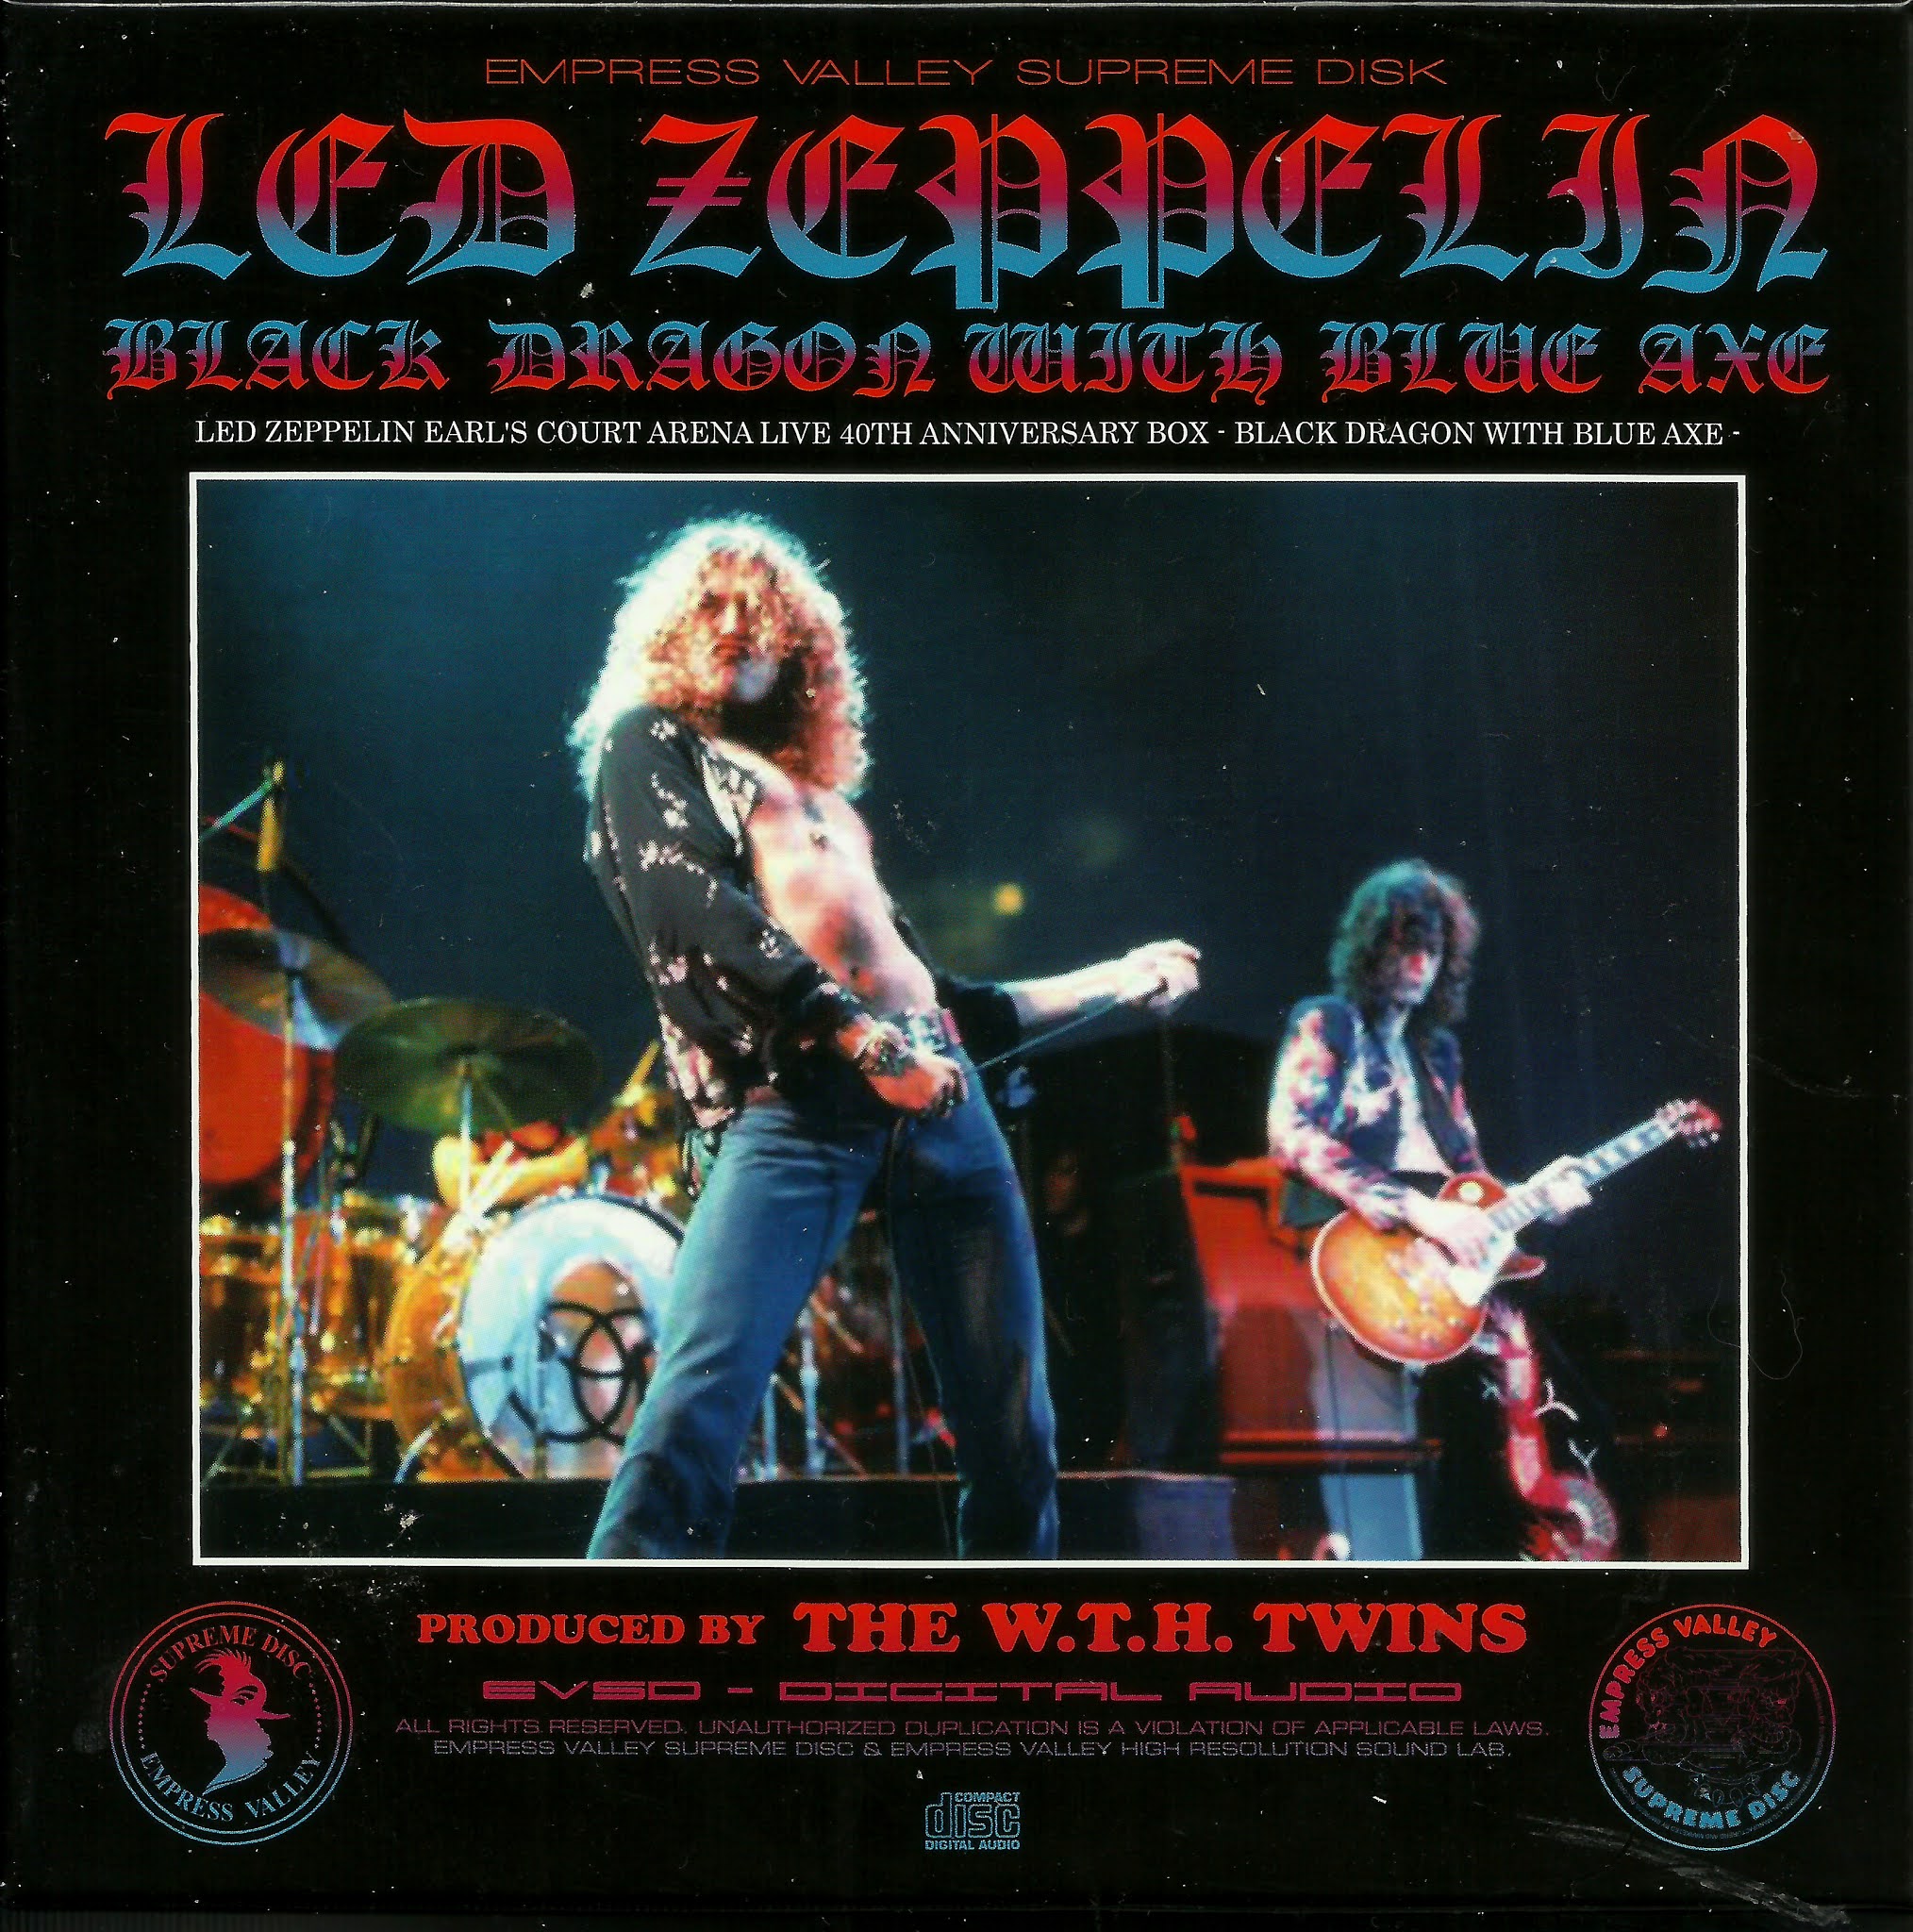 Long Live Led Zeppelin : 1975.05.18 Black Dragon With Blue Axe 15